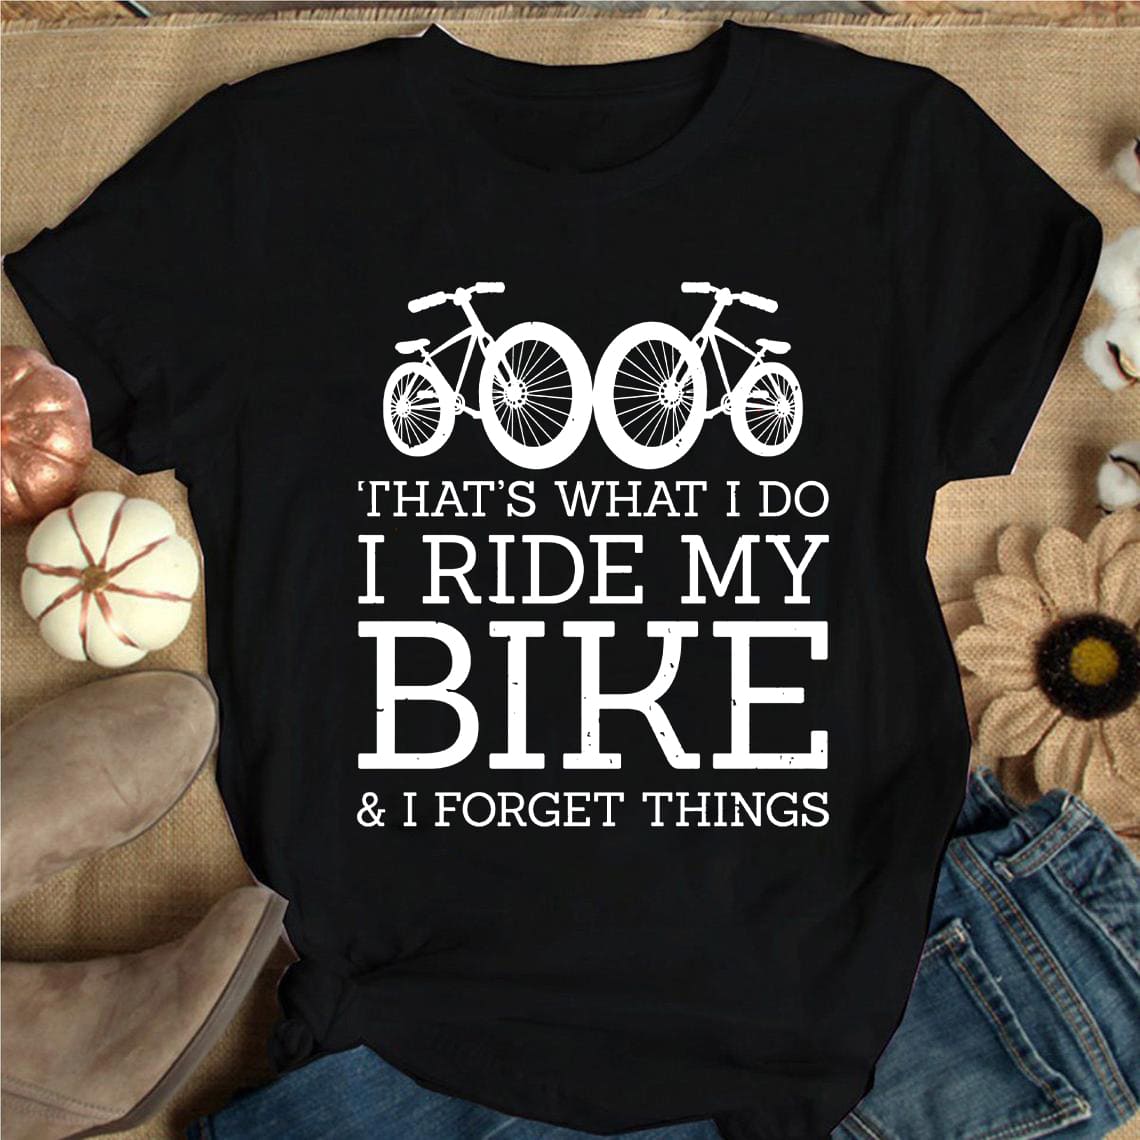 That's what I do I ride my bike and I forget things - Gift for biker, riding bike for health